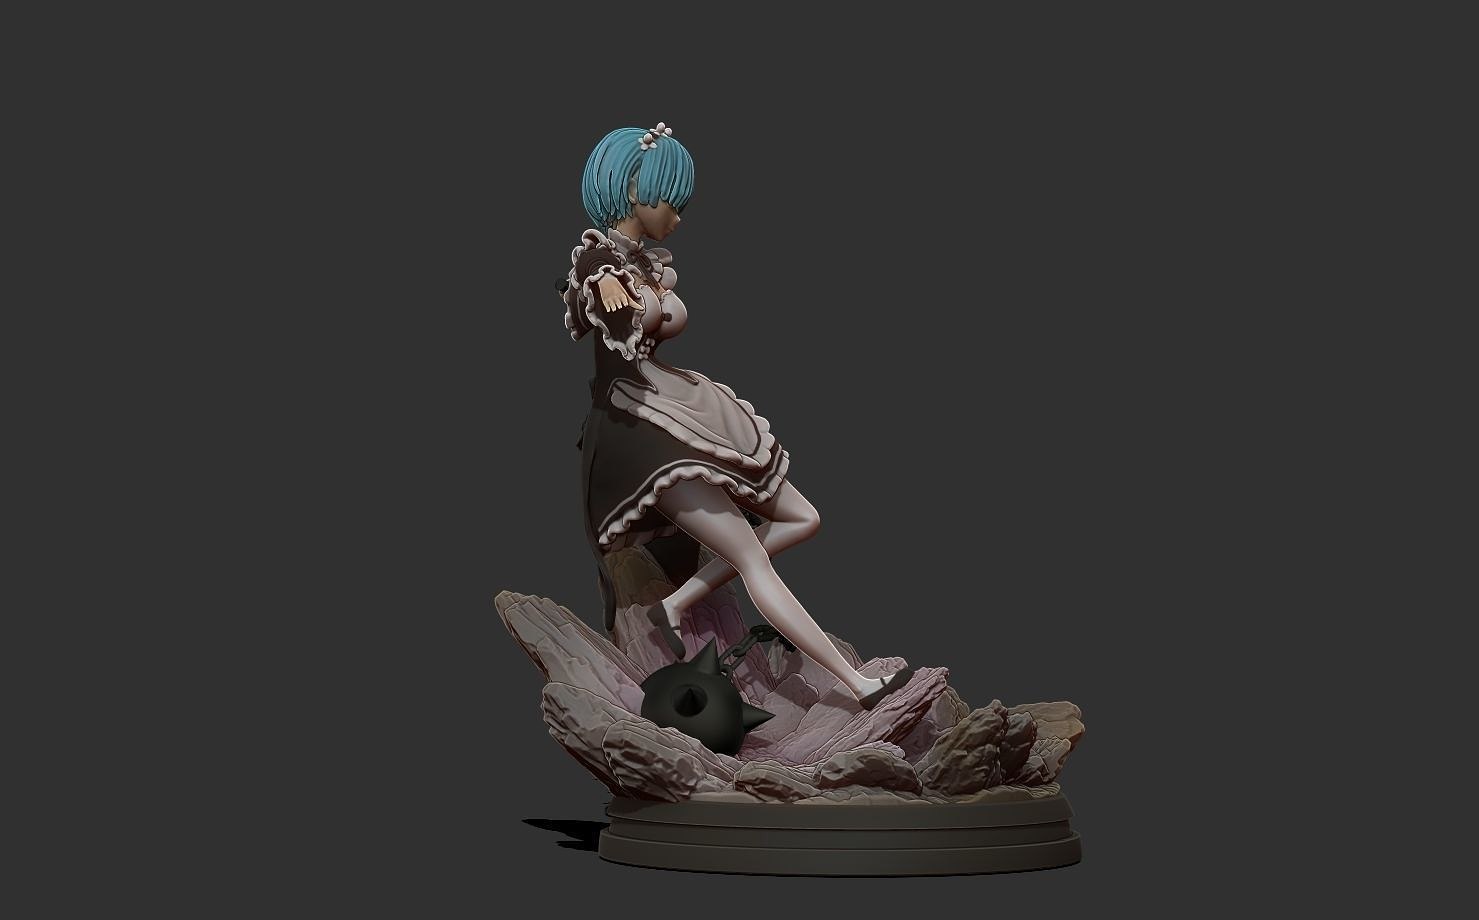 Rem From Re Zero